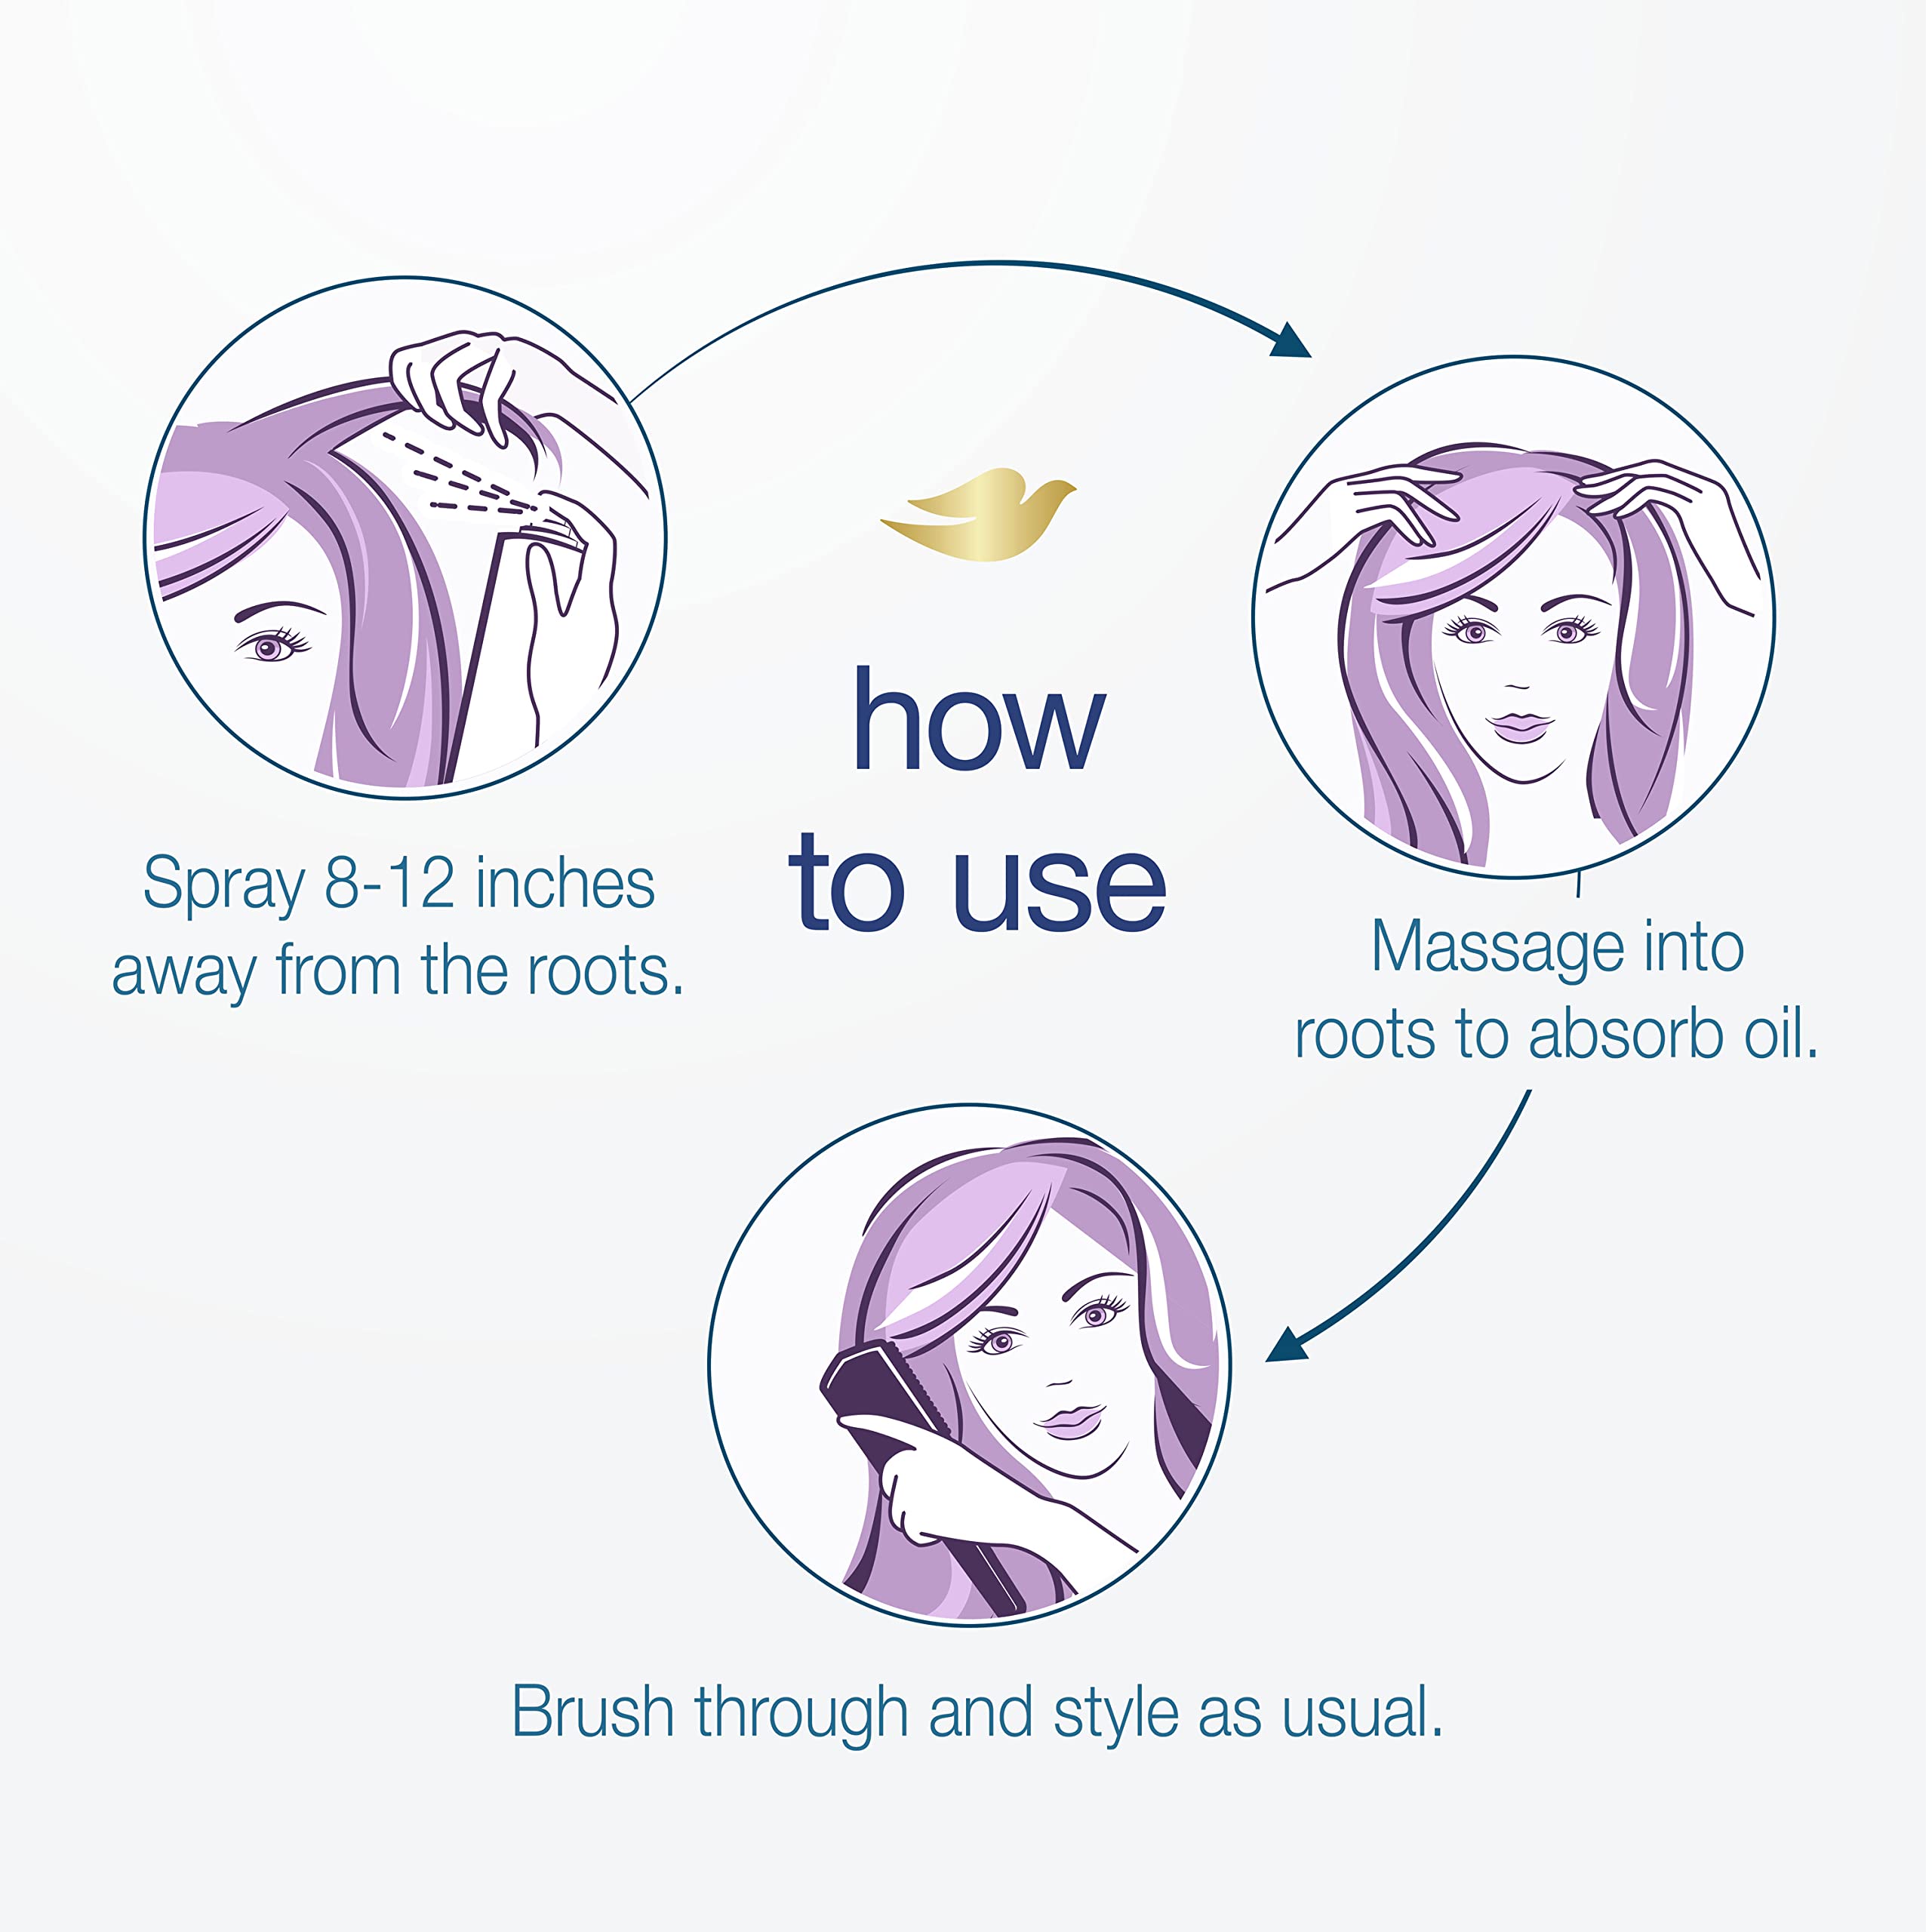 Dove Care Between Washes Dry Shampoo Volume and Fullness Hair Treatment for Oily Hair, Cleansing Hair Volumizer 5 oz